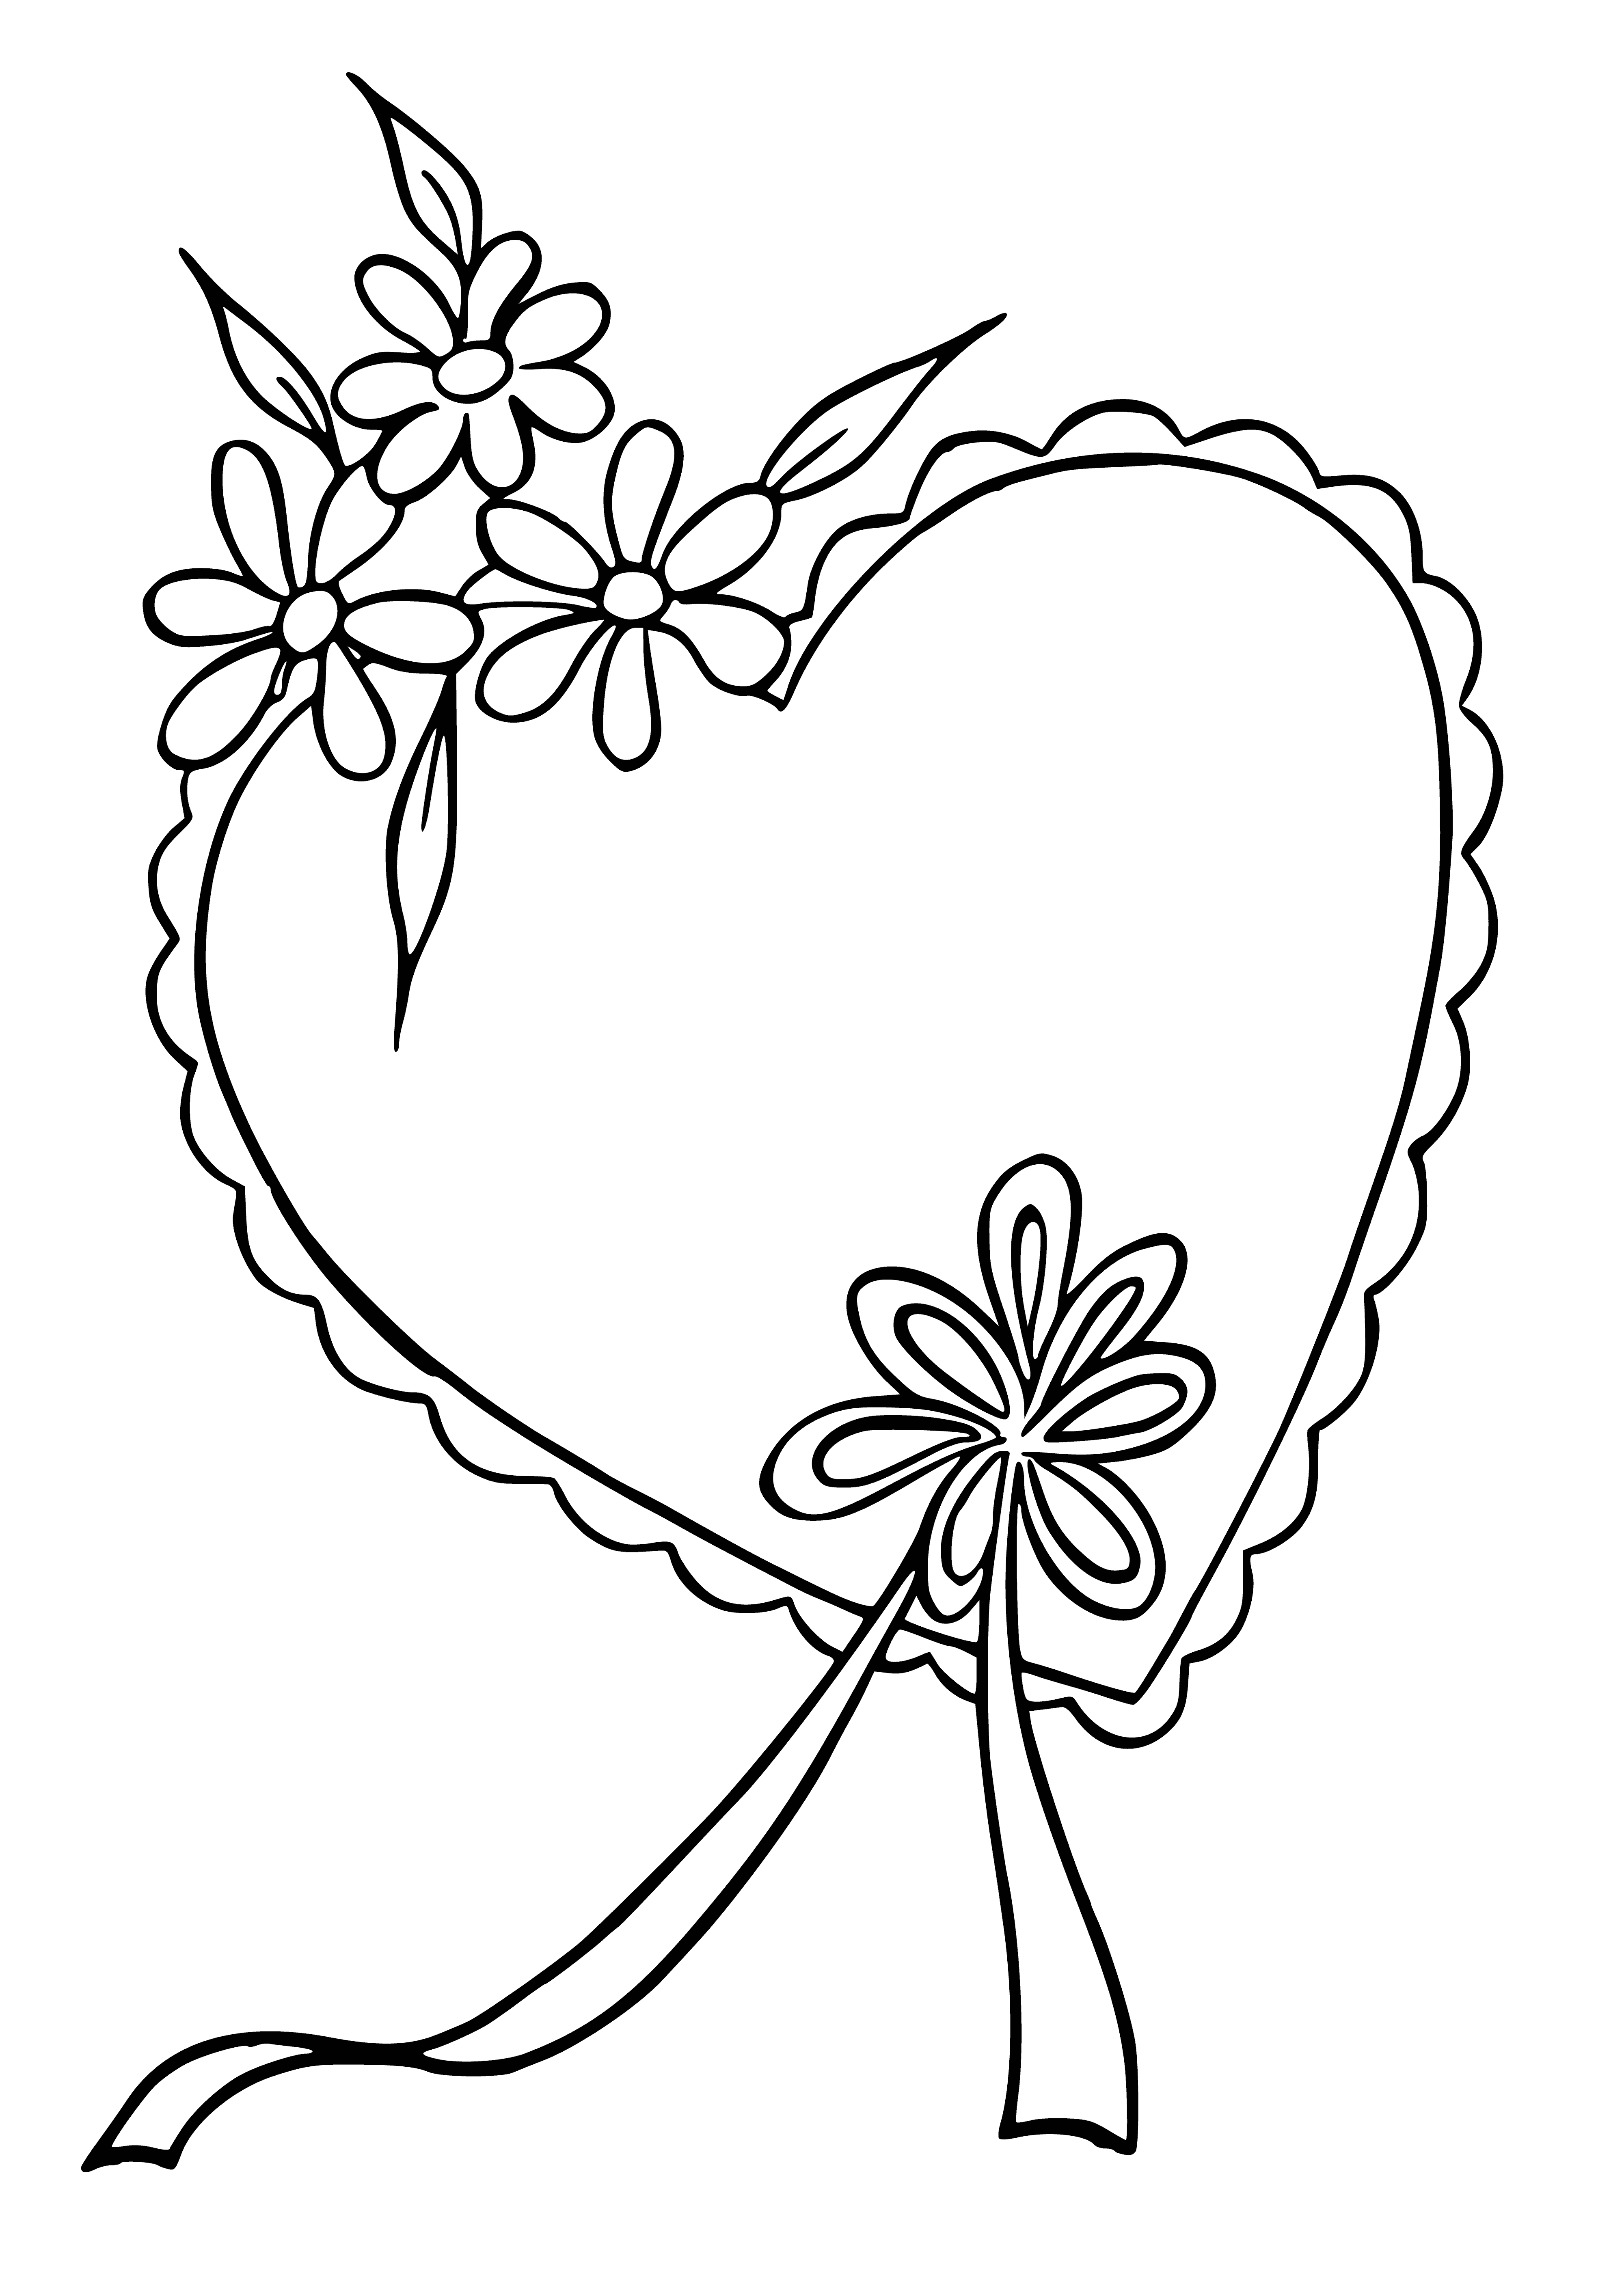 coloring page: A heart shape, red with two white circles inside, is in the center of a light pink page surrounded by a white border.